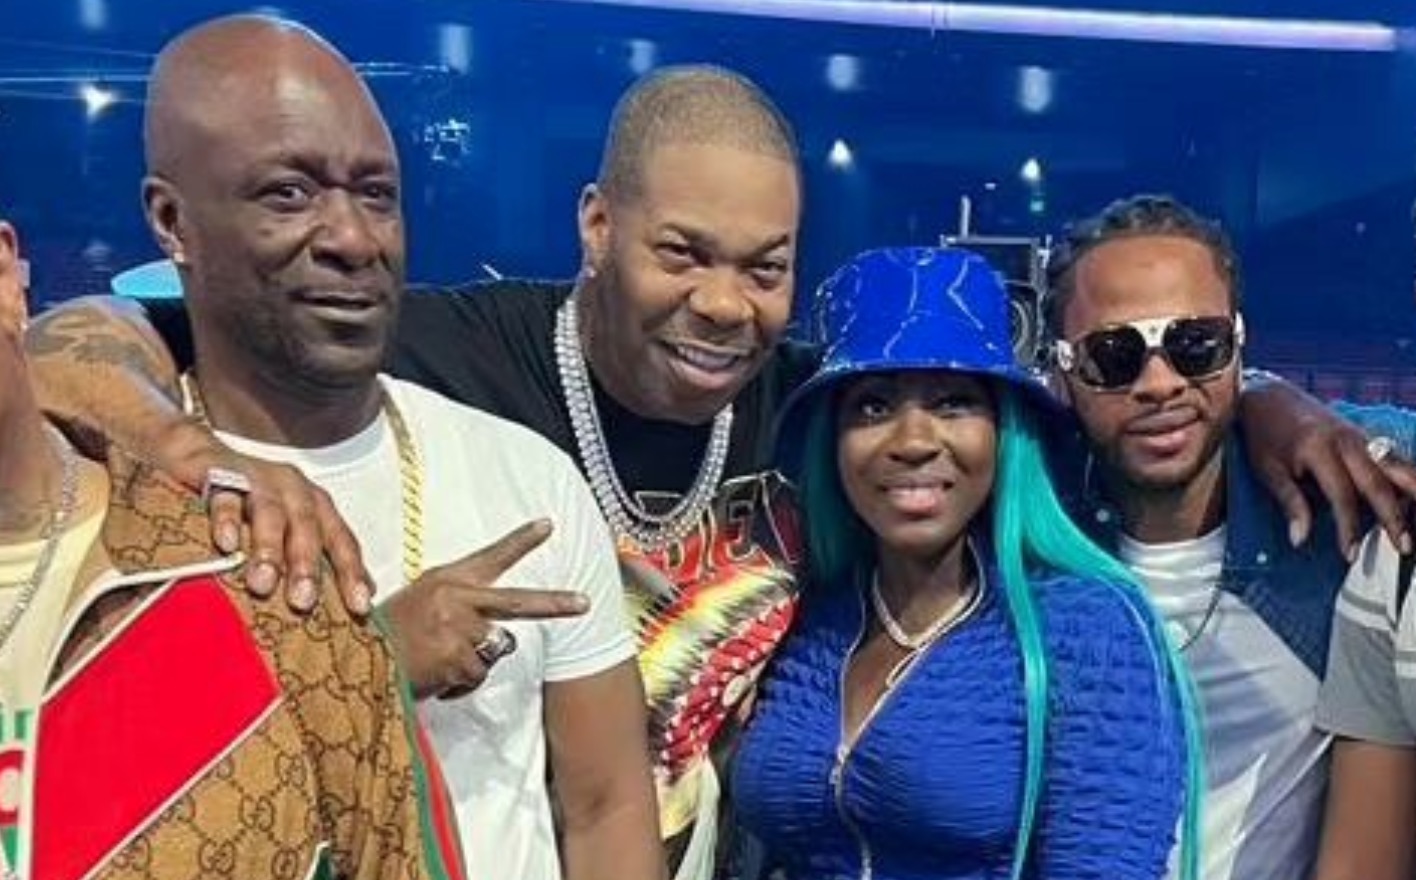 Spice, Dexta Daps, Skillibeng and Cutty Ranks EPIC Performance at BET Awards - Watch Videos